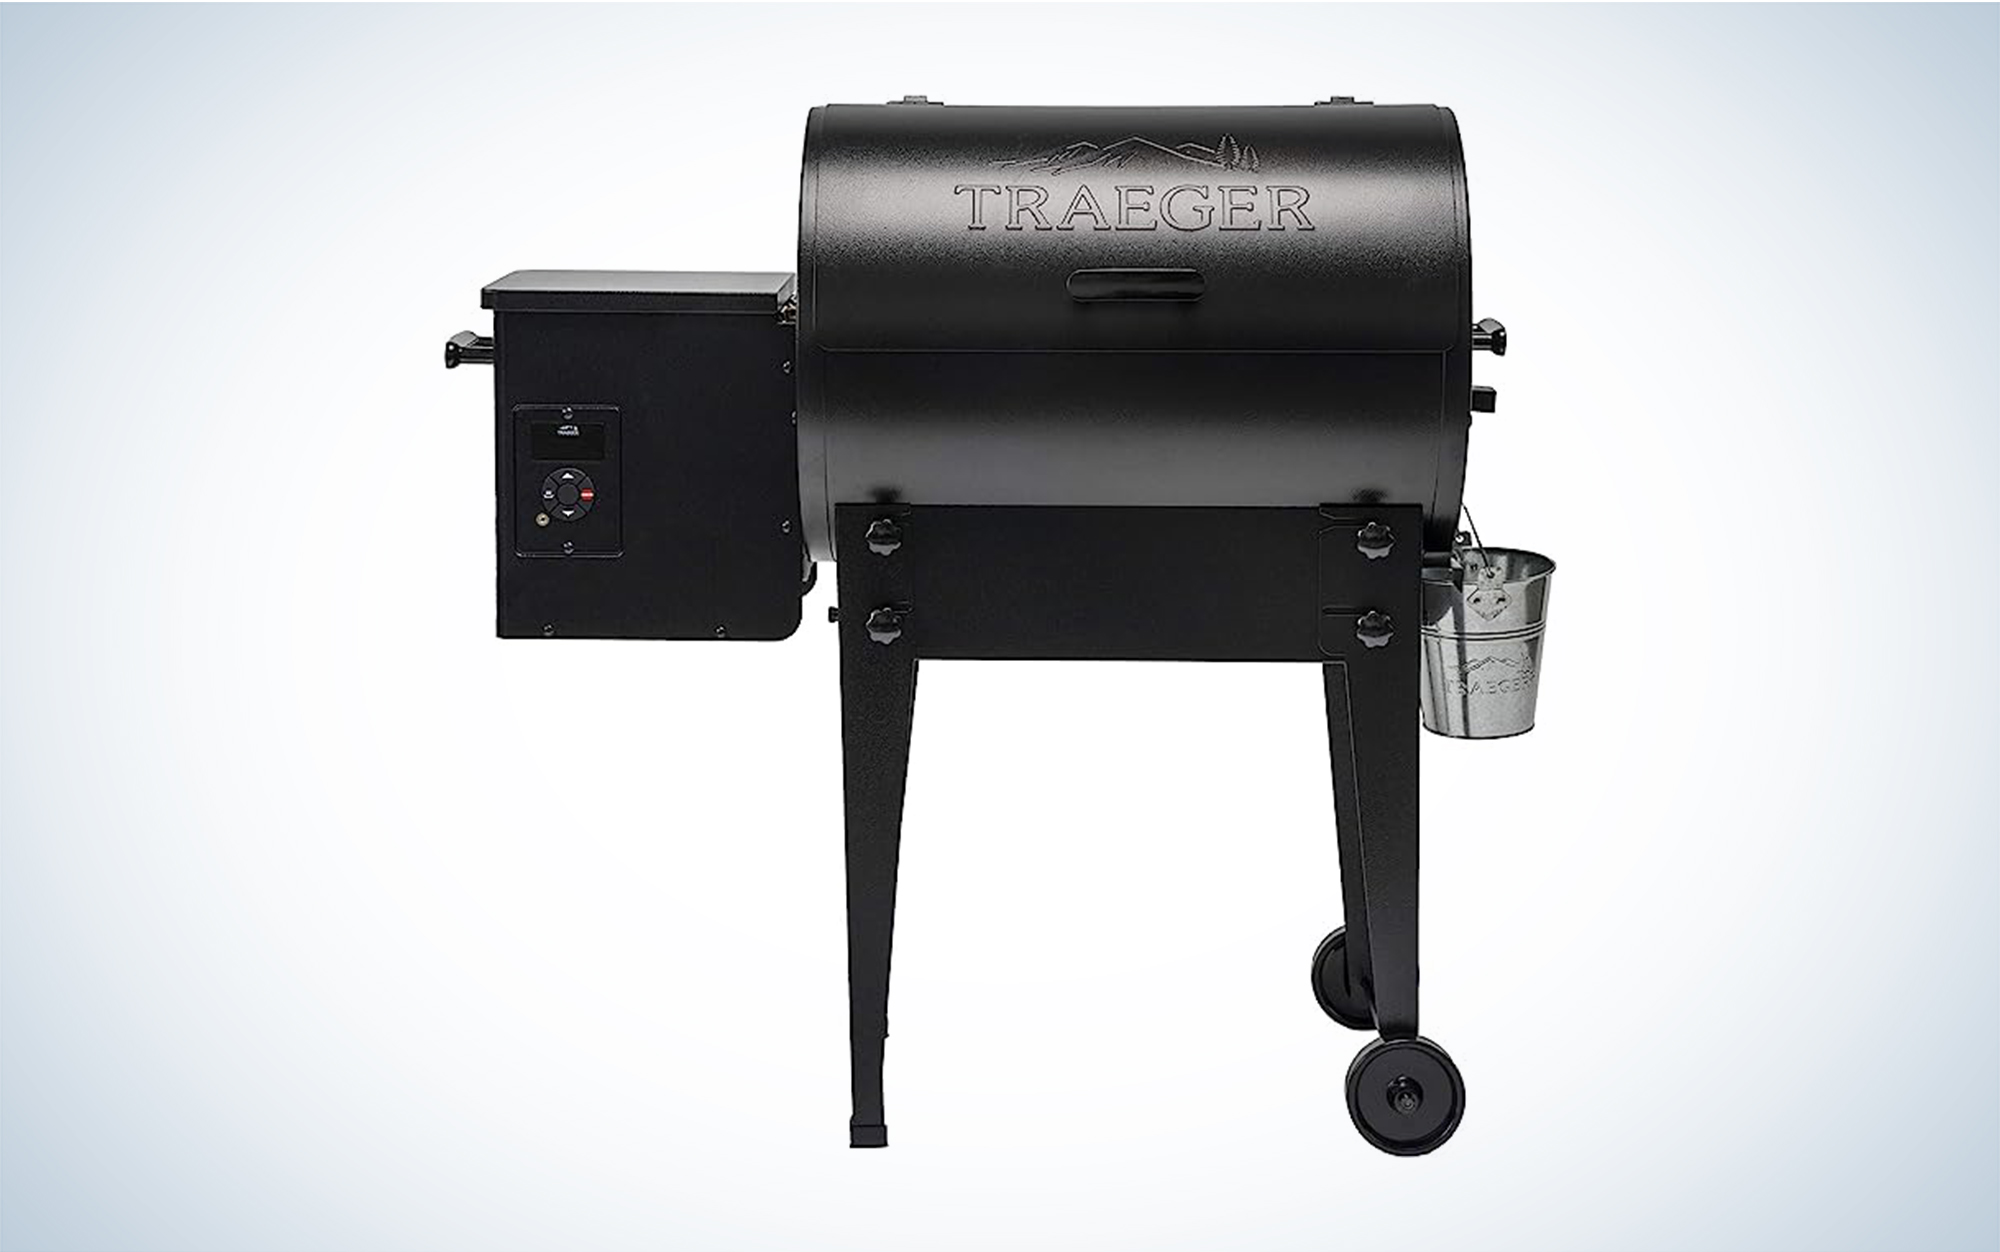 We tested the Traeger Tailgater 20.